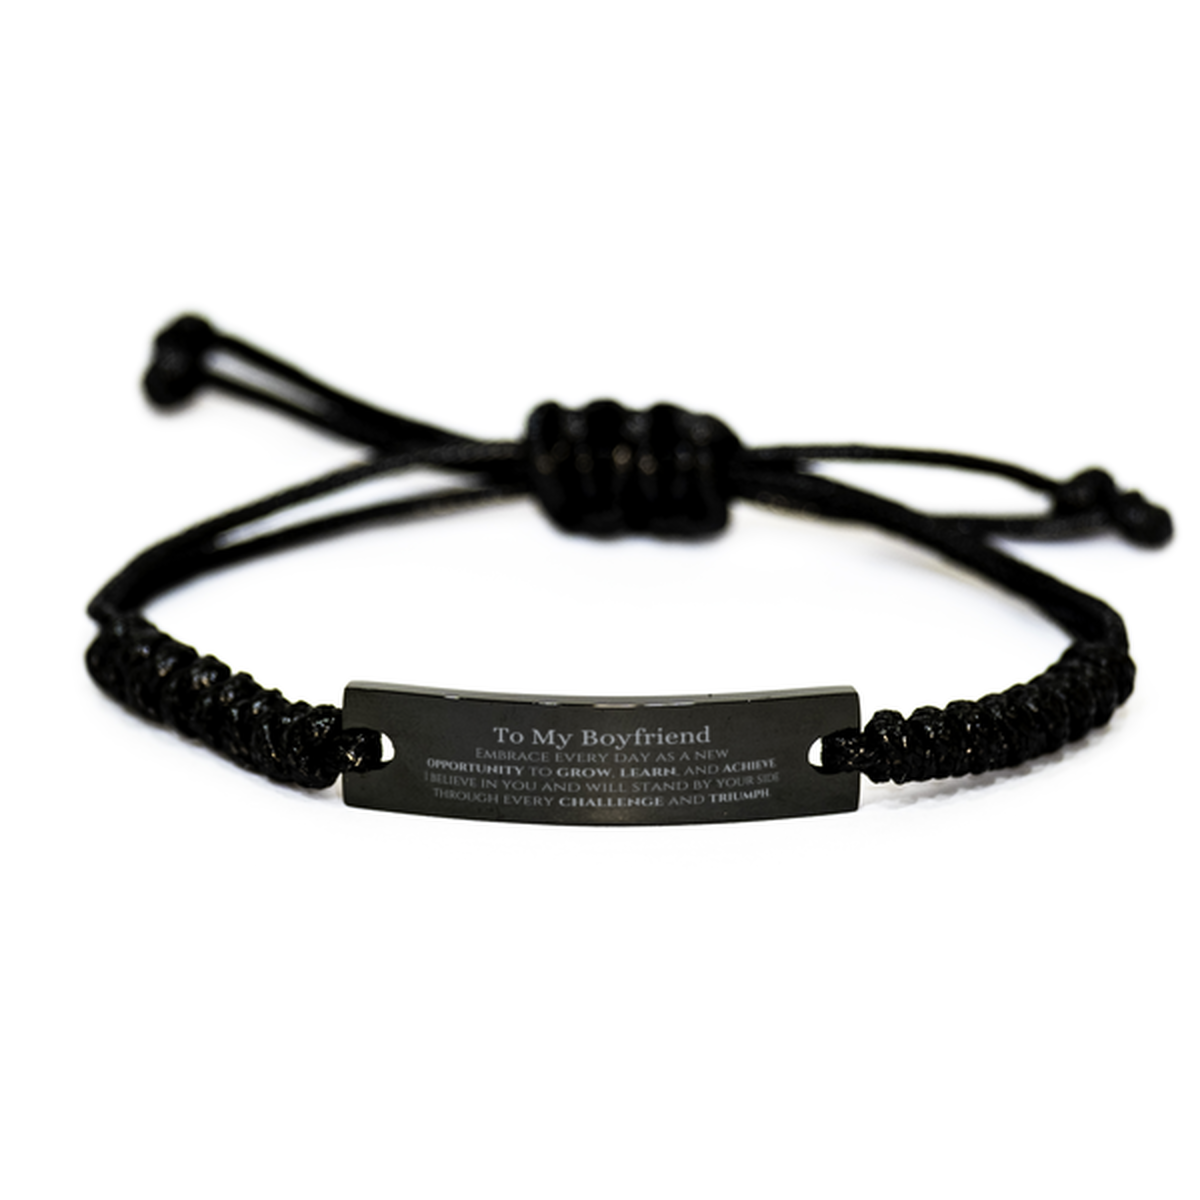 To My Boyfriend Gifts, I believe in you and will stand by your side, Inspirational Black Rope Bracelet For Boyfriend, Birthday Christmas Motivational Boyfriend Gifts